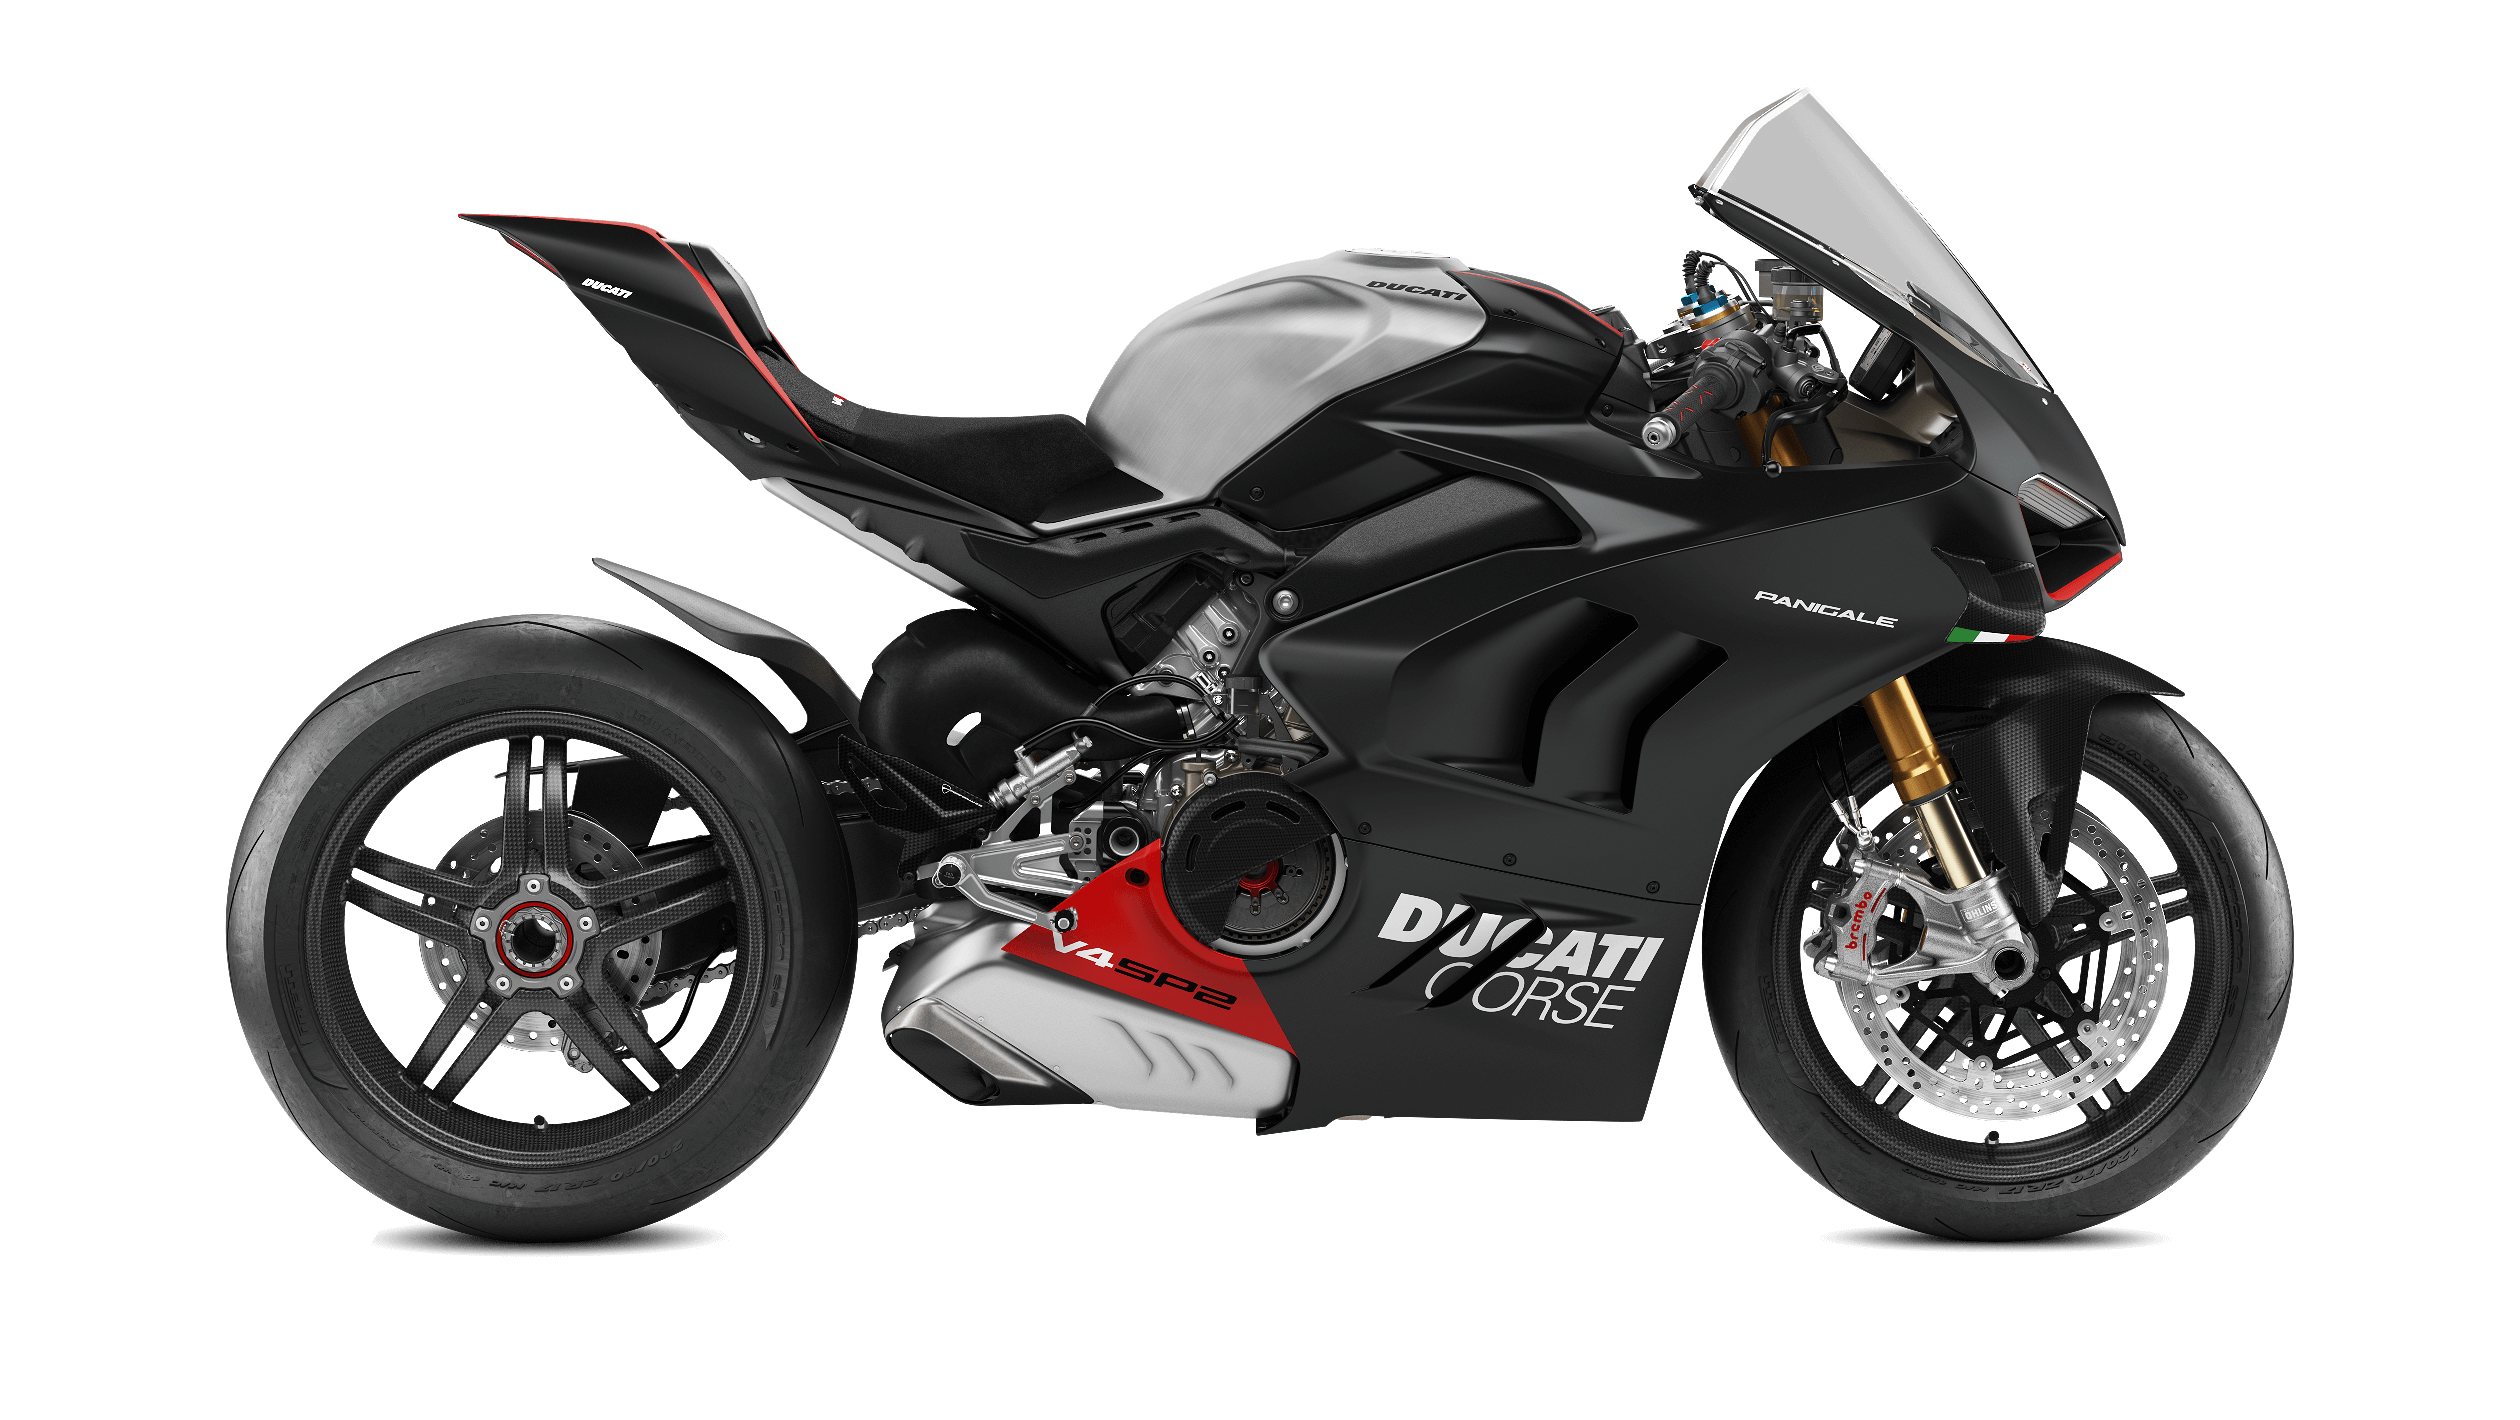 Panigale V4 SP2   The Ultimate Racetrack Machine